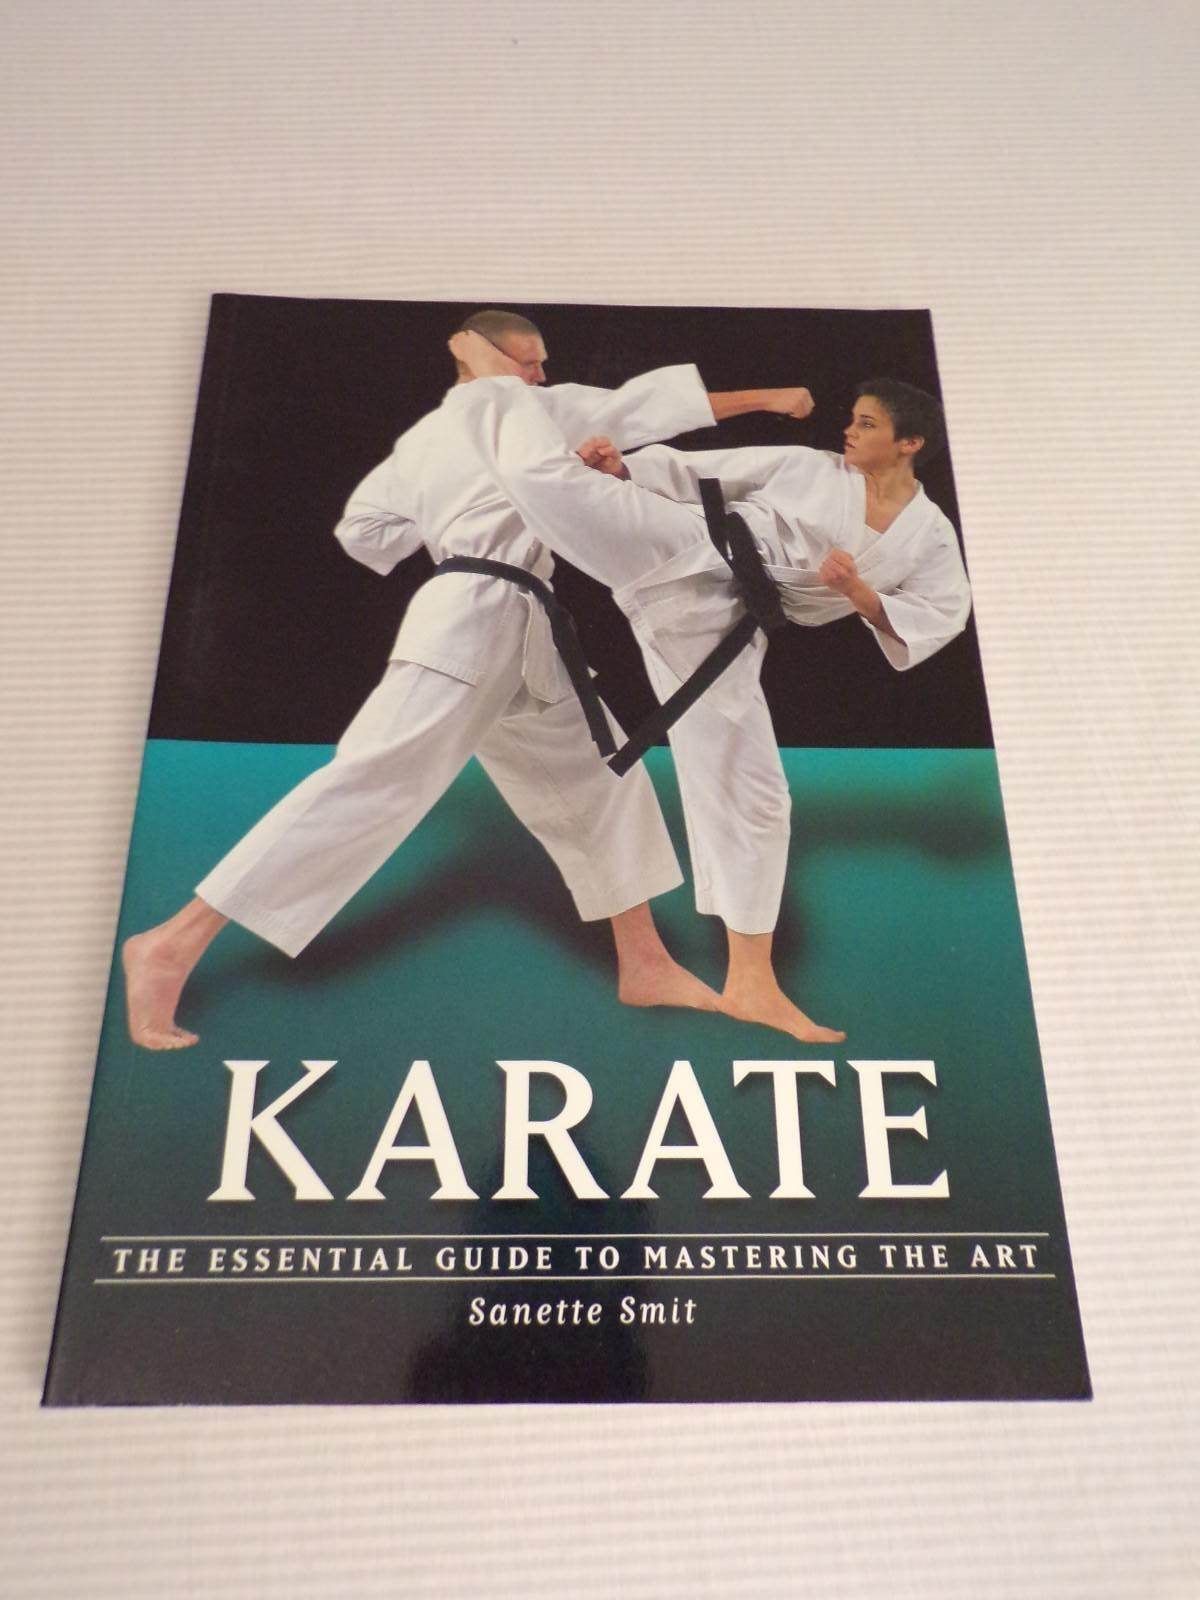 Karate: The Essential Guide to Mastering the Art